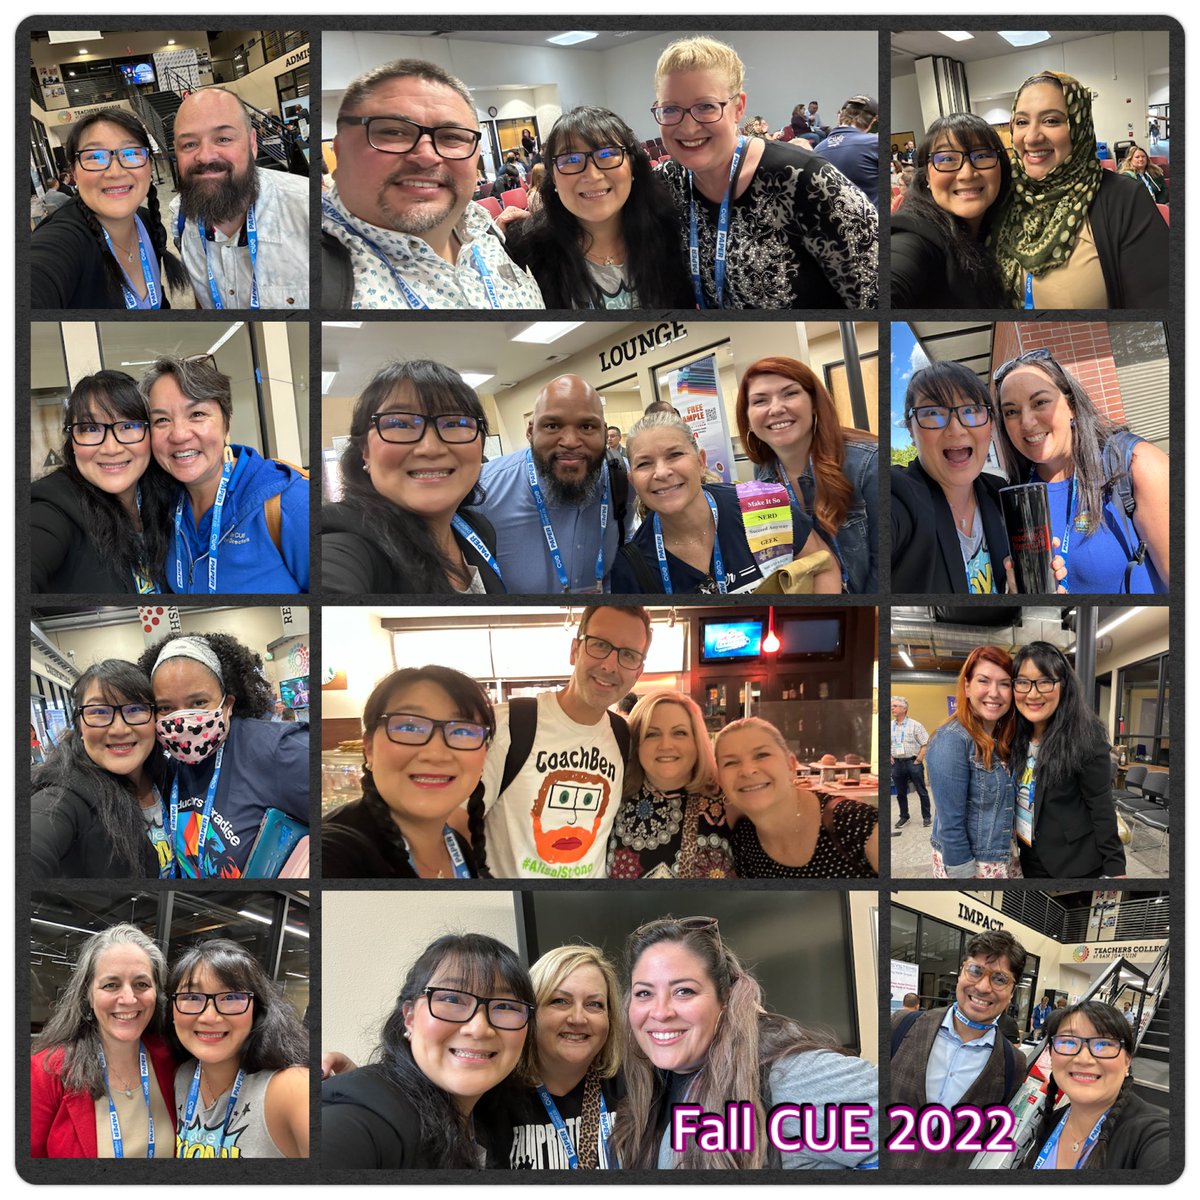 #FallCUE was a blast. I got to learn from talented folks, catch up w colleagues doing amazing things w Ss, host #CUEBOOM, throw an #EPSmackdown, and be inspired to use some #vintageinnovation while letting go of things that no longer serve me. 

Thank you, #cuemmunity. #wearecue